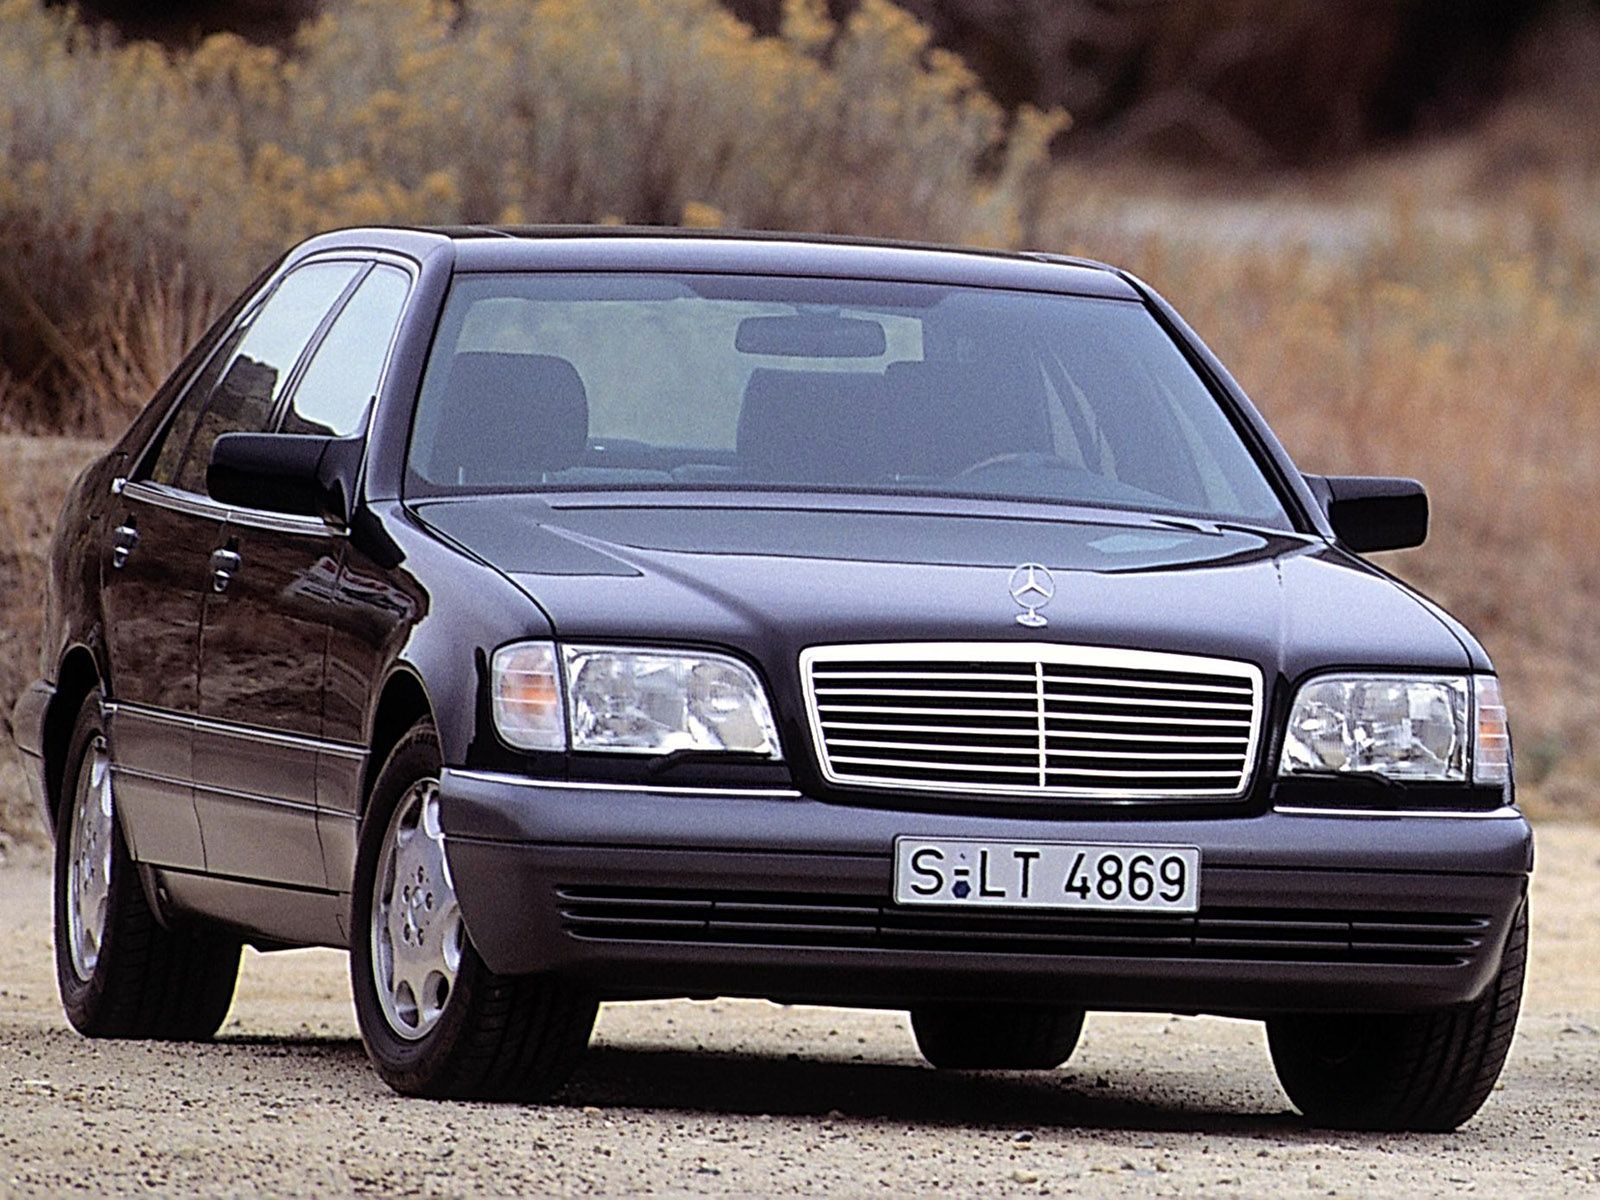 Mercedes Benz S Class W140 Picture. Mercedes Benz Photo Gallery